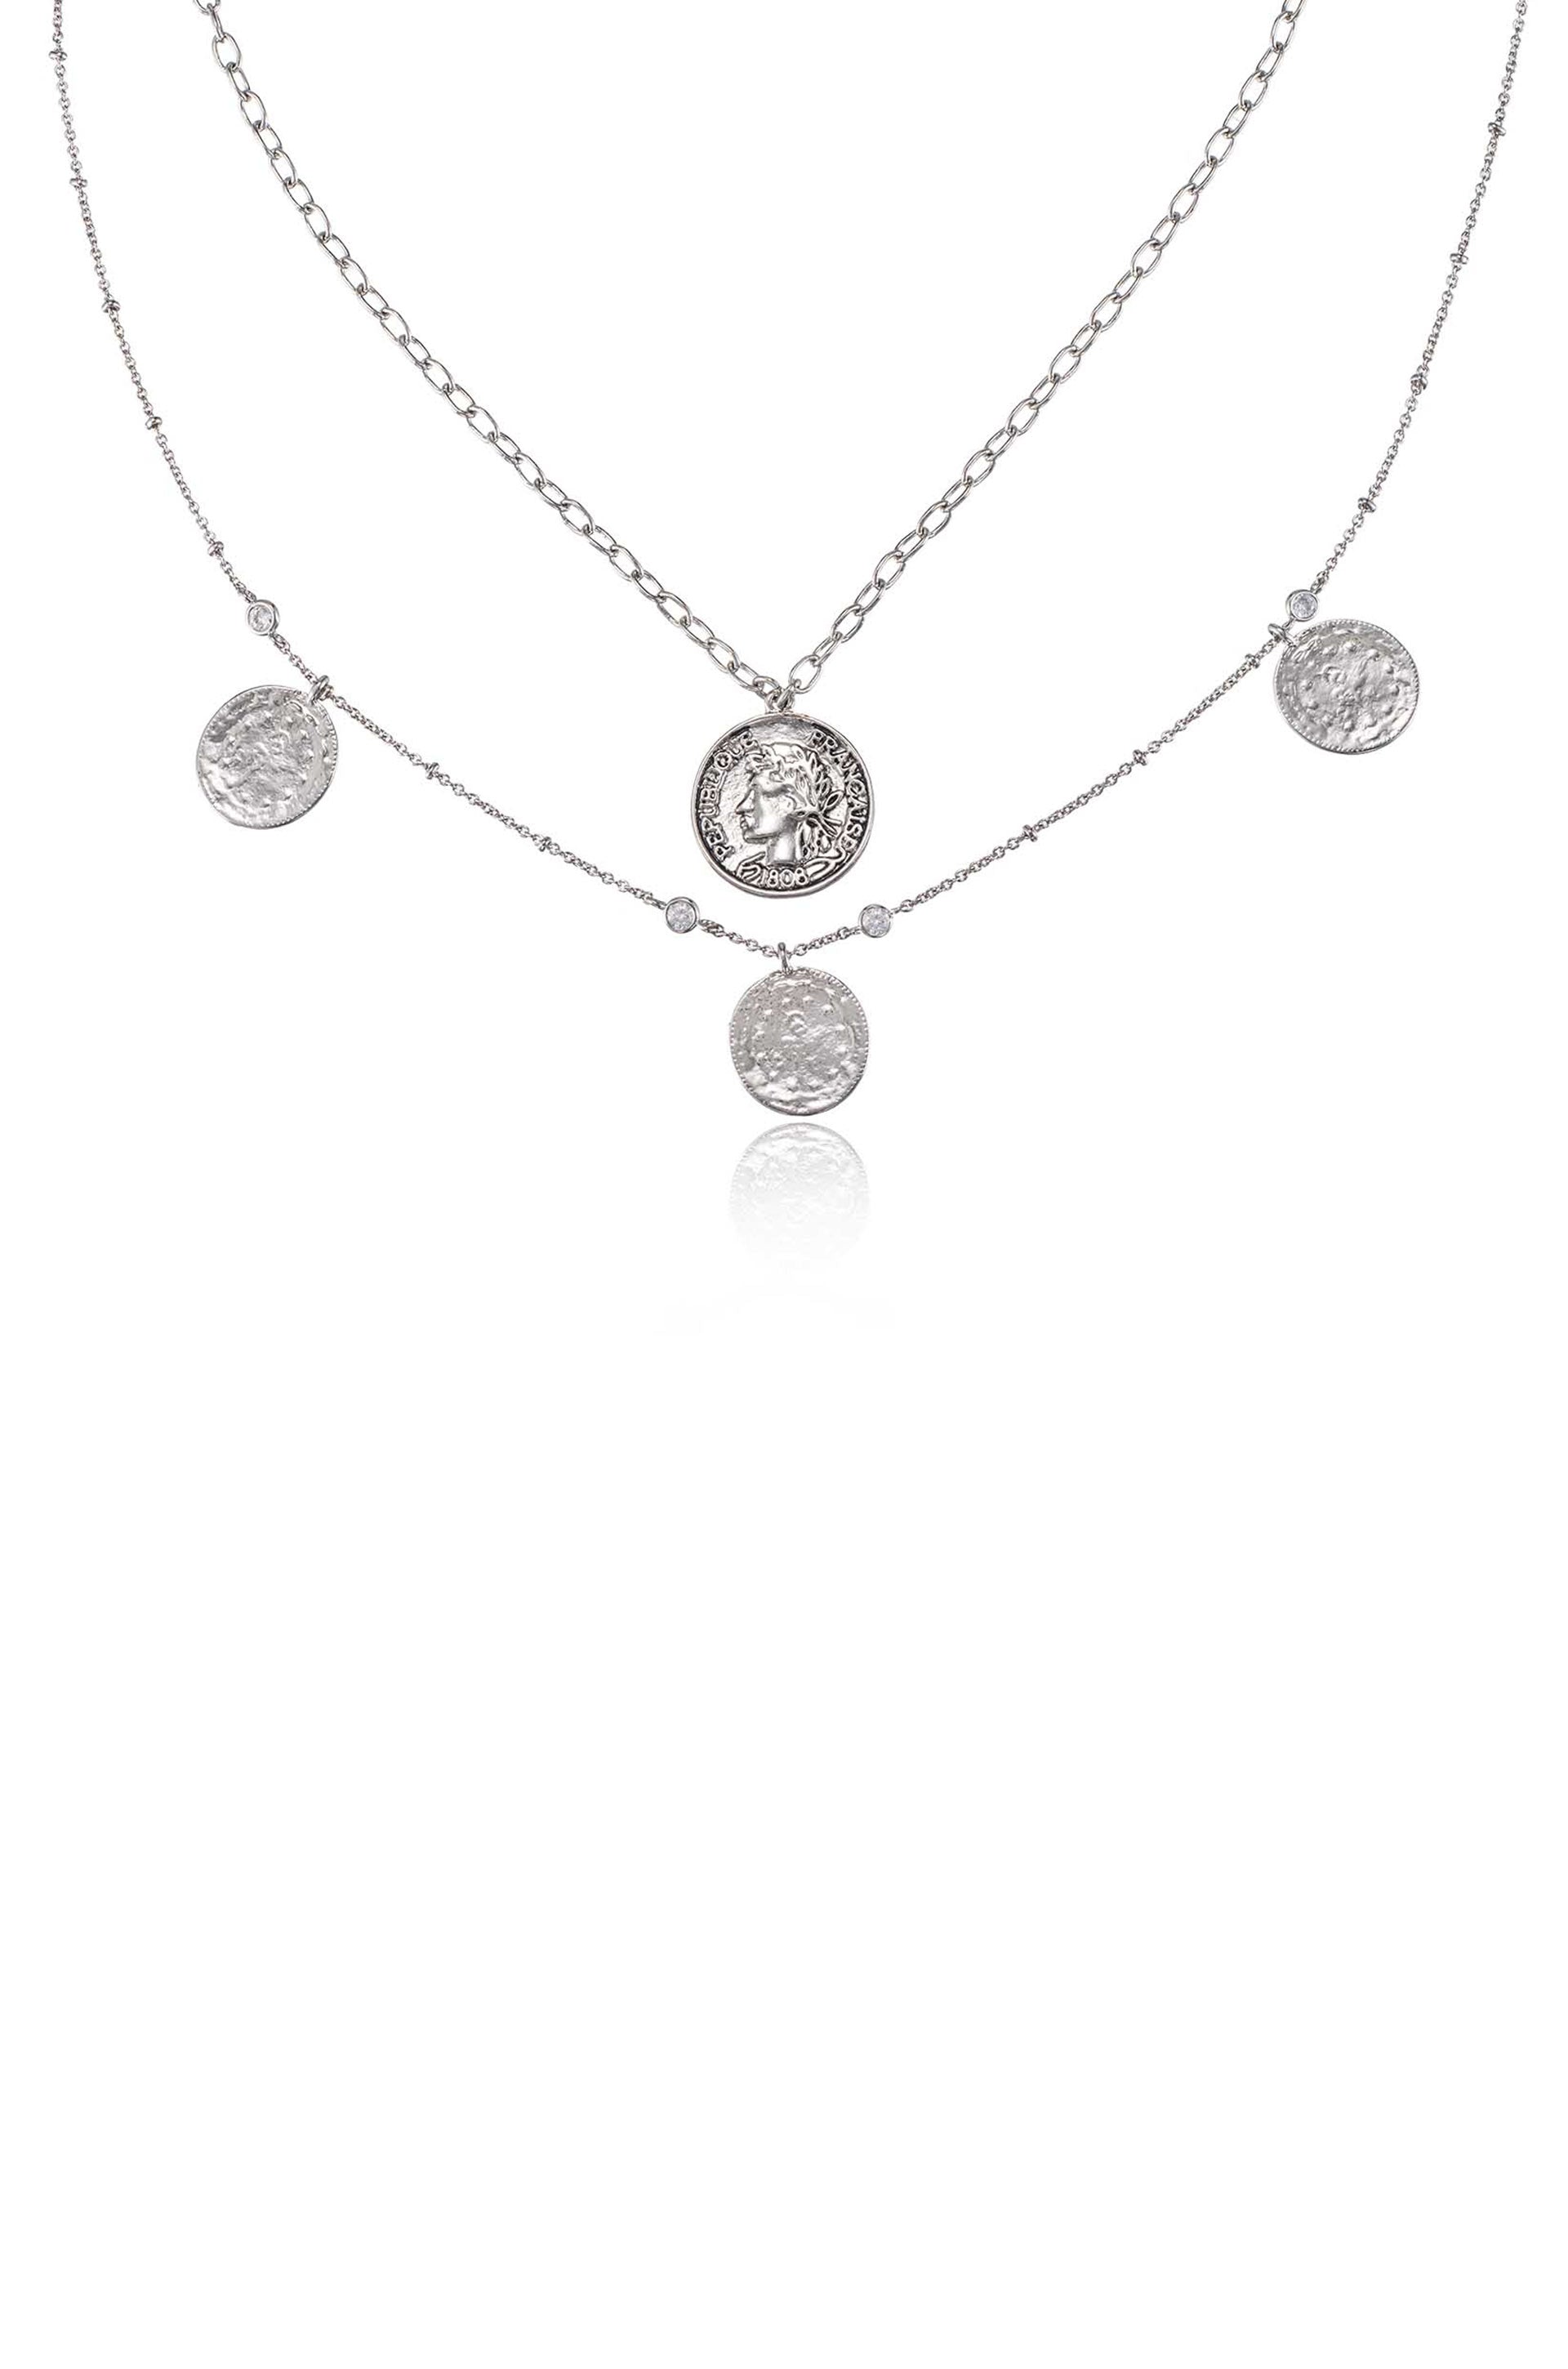 Elite Coin and Crystal Layered Necklace Set in rhodium